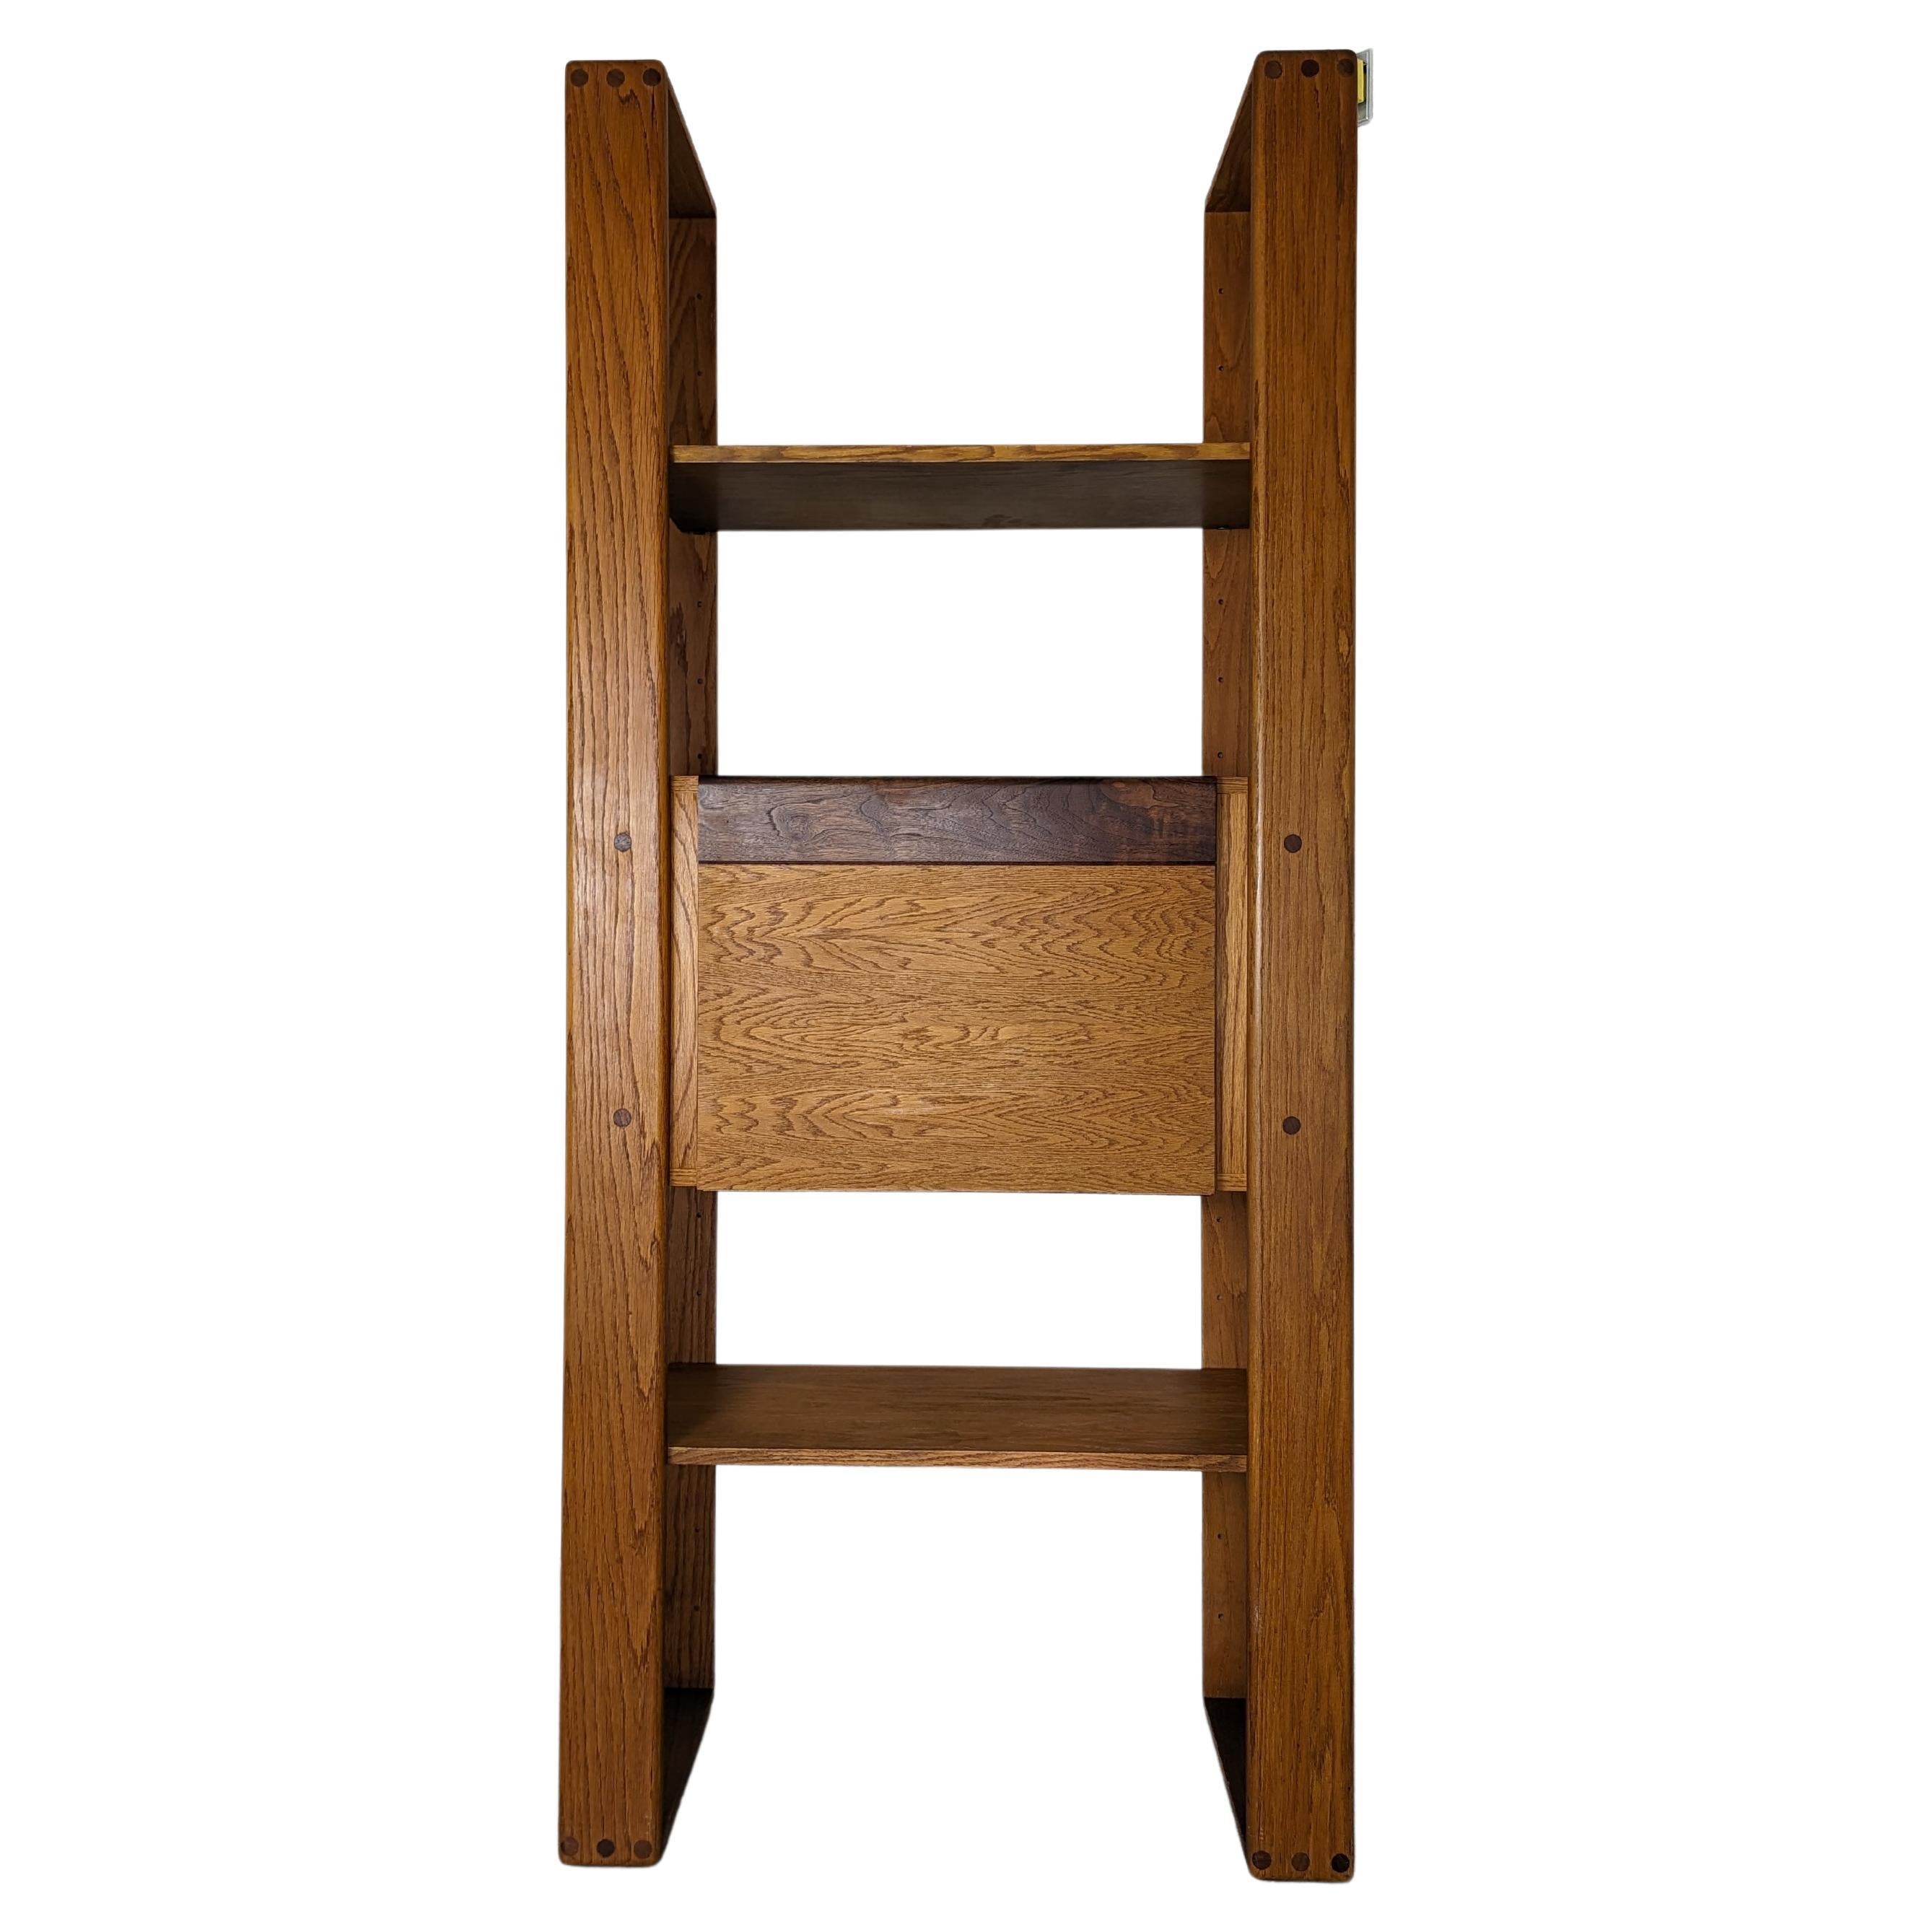 For sale is a genuine, mid-century modern marvel - a cerused oak modular standalone shelving unit, designed by the renowned Lou Hodges in 1979. This cherished piece comes straight from the creative minds of the California Design Group, known for